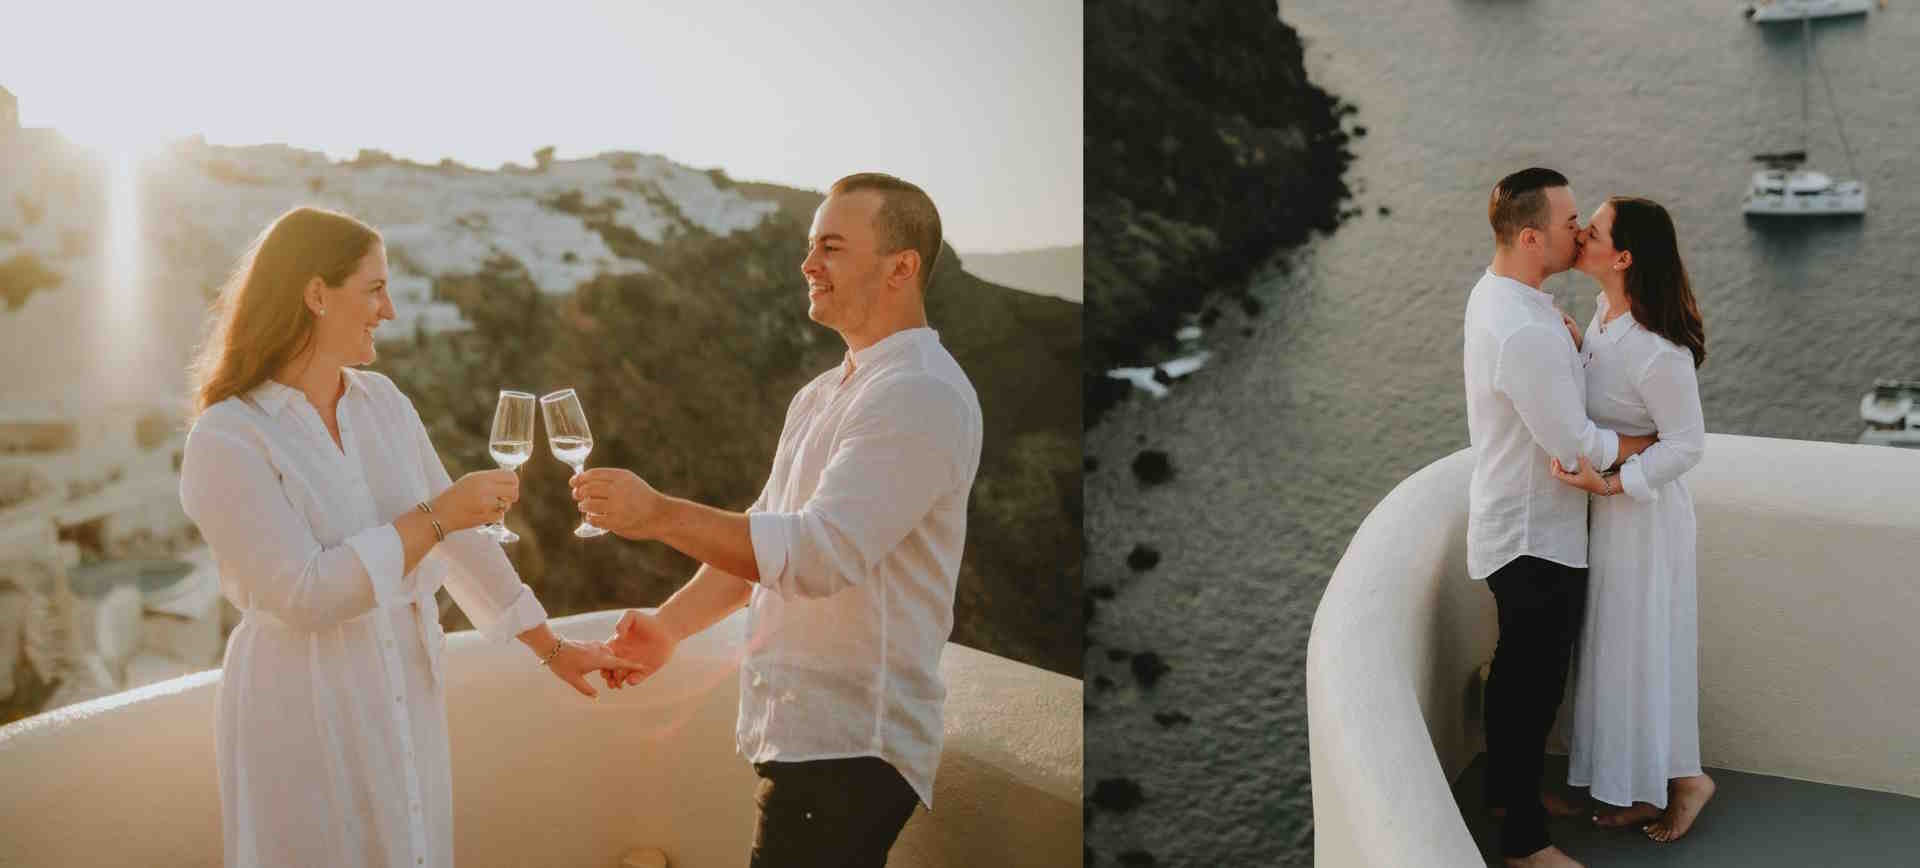 Santorini Elopement Package Private Cliffside Ceremony Dinner Experience in Greece